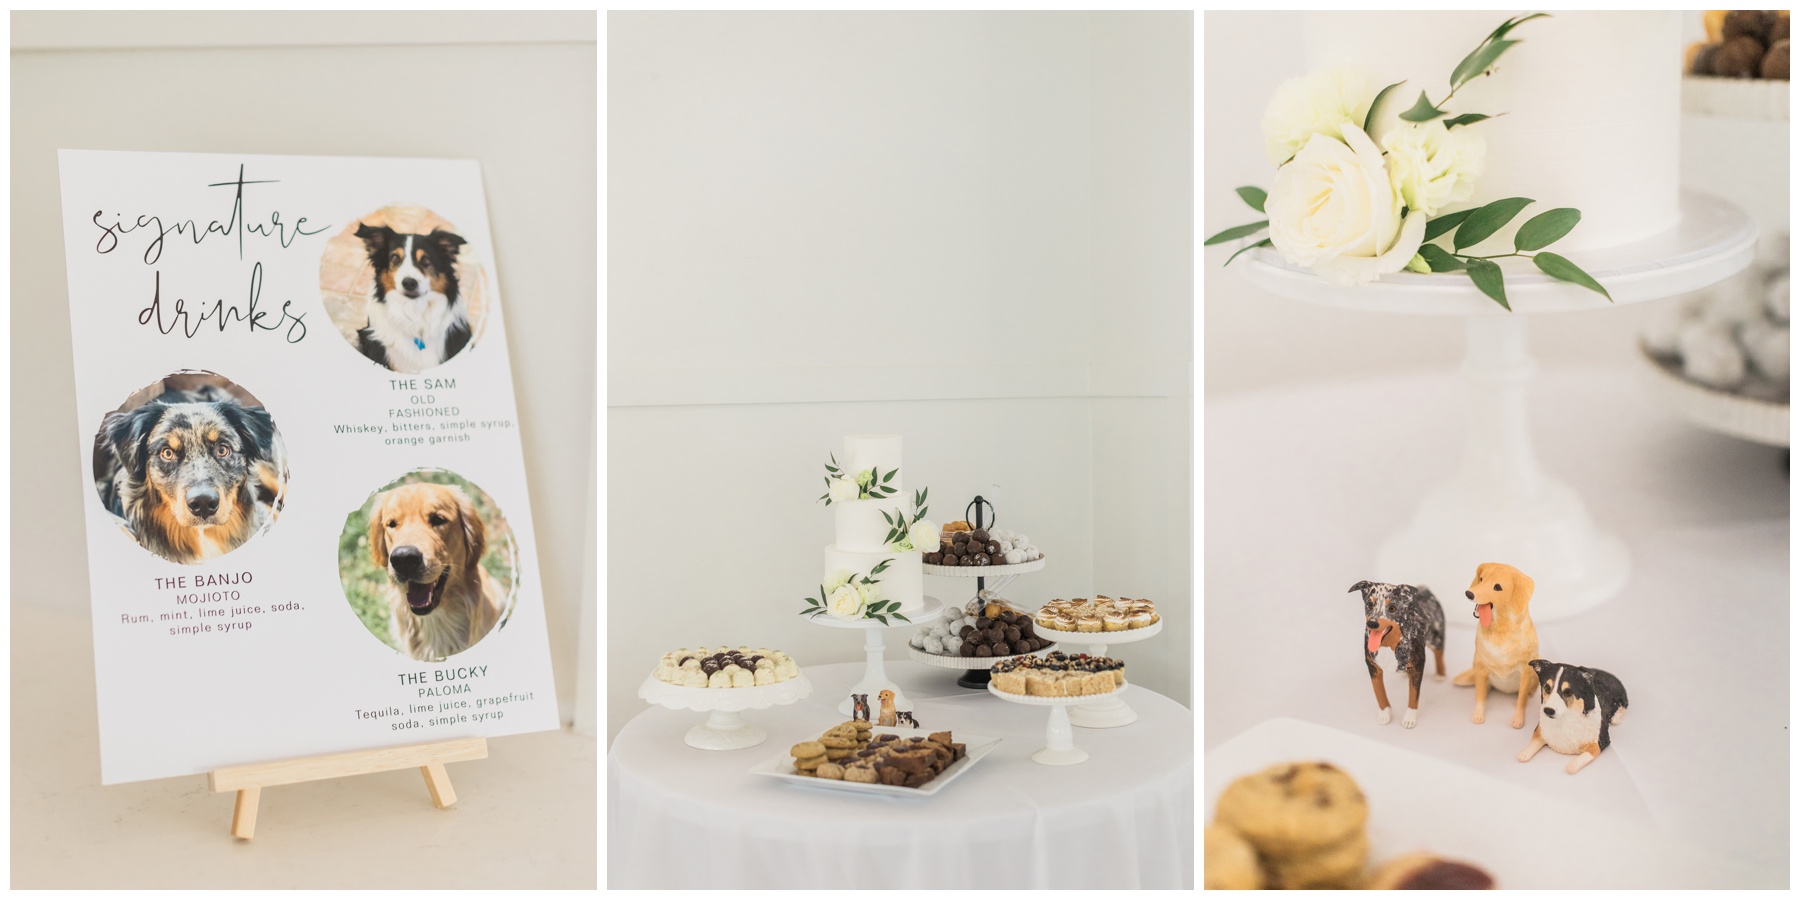 Signature drink sign with photos of the bride and groom's pets